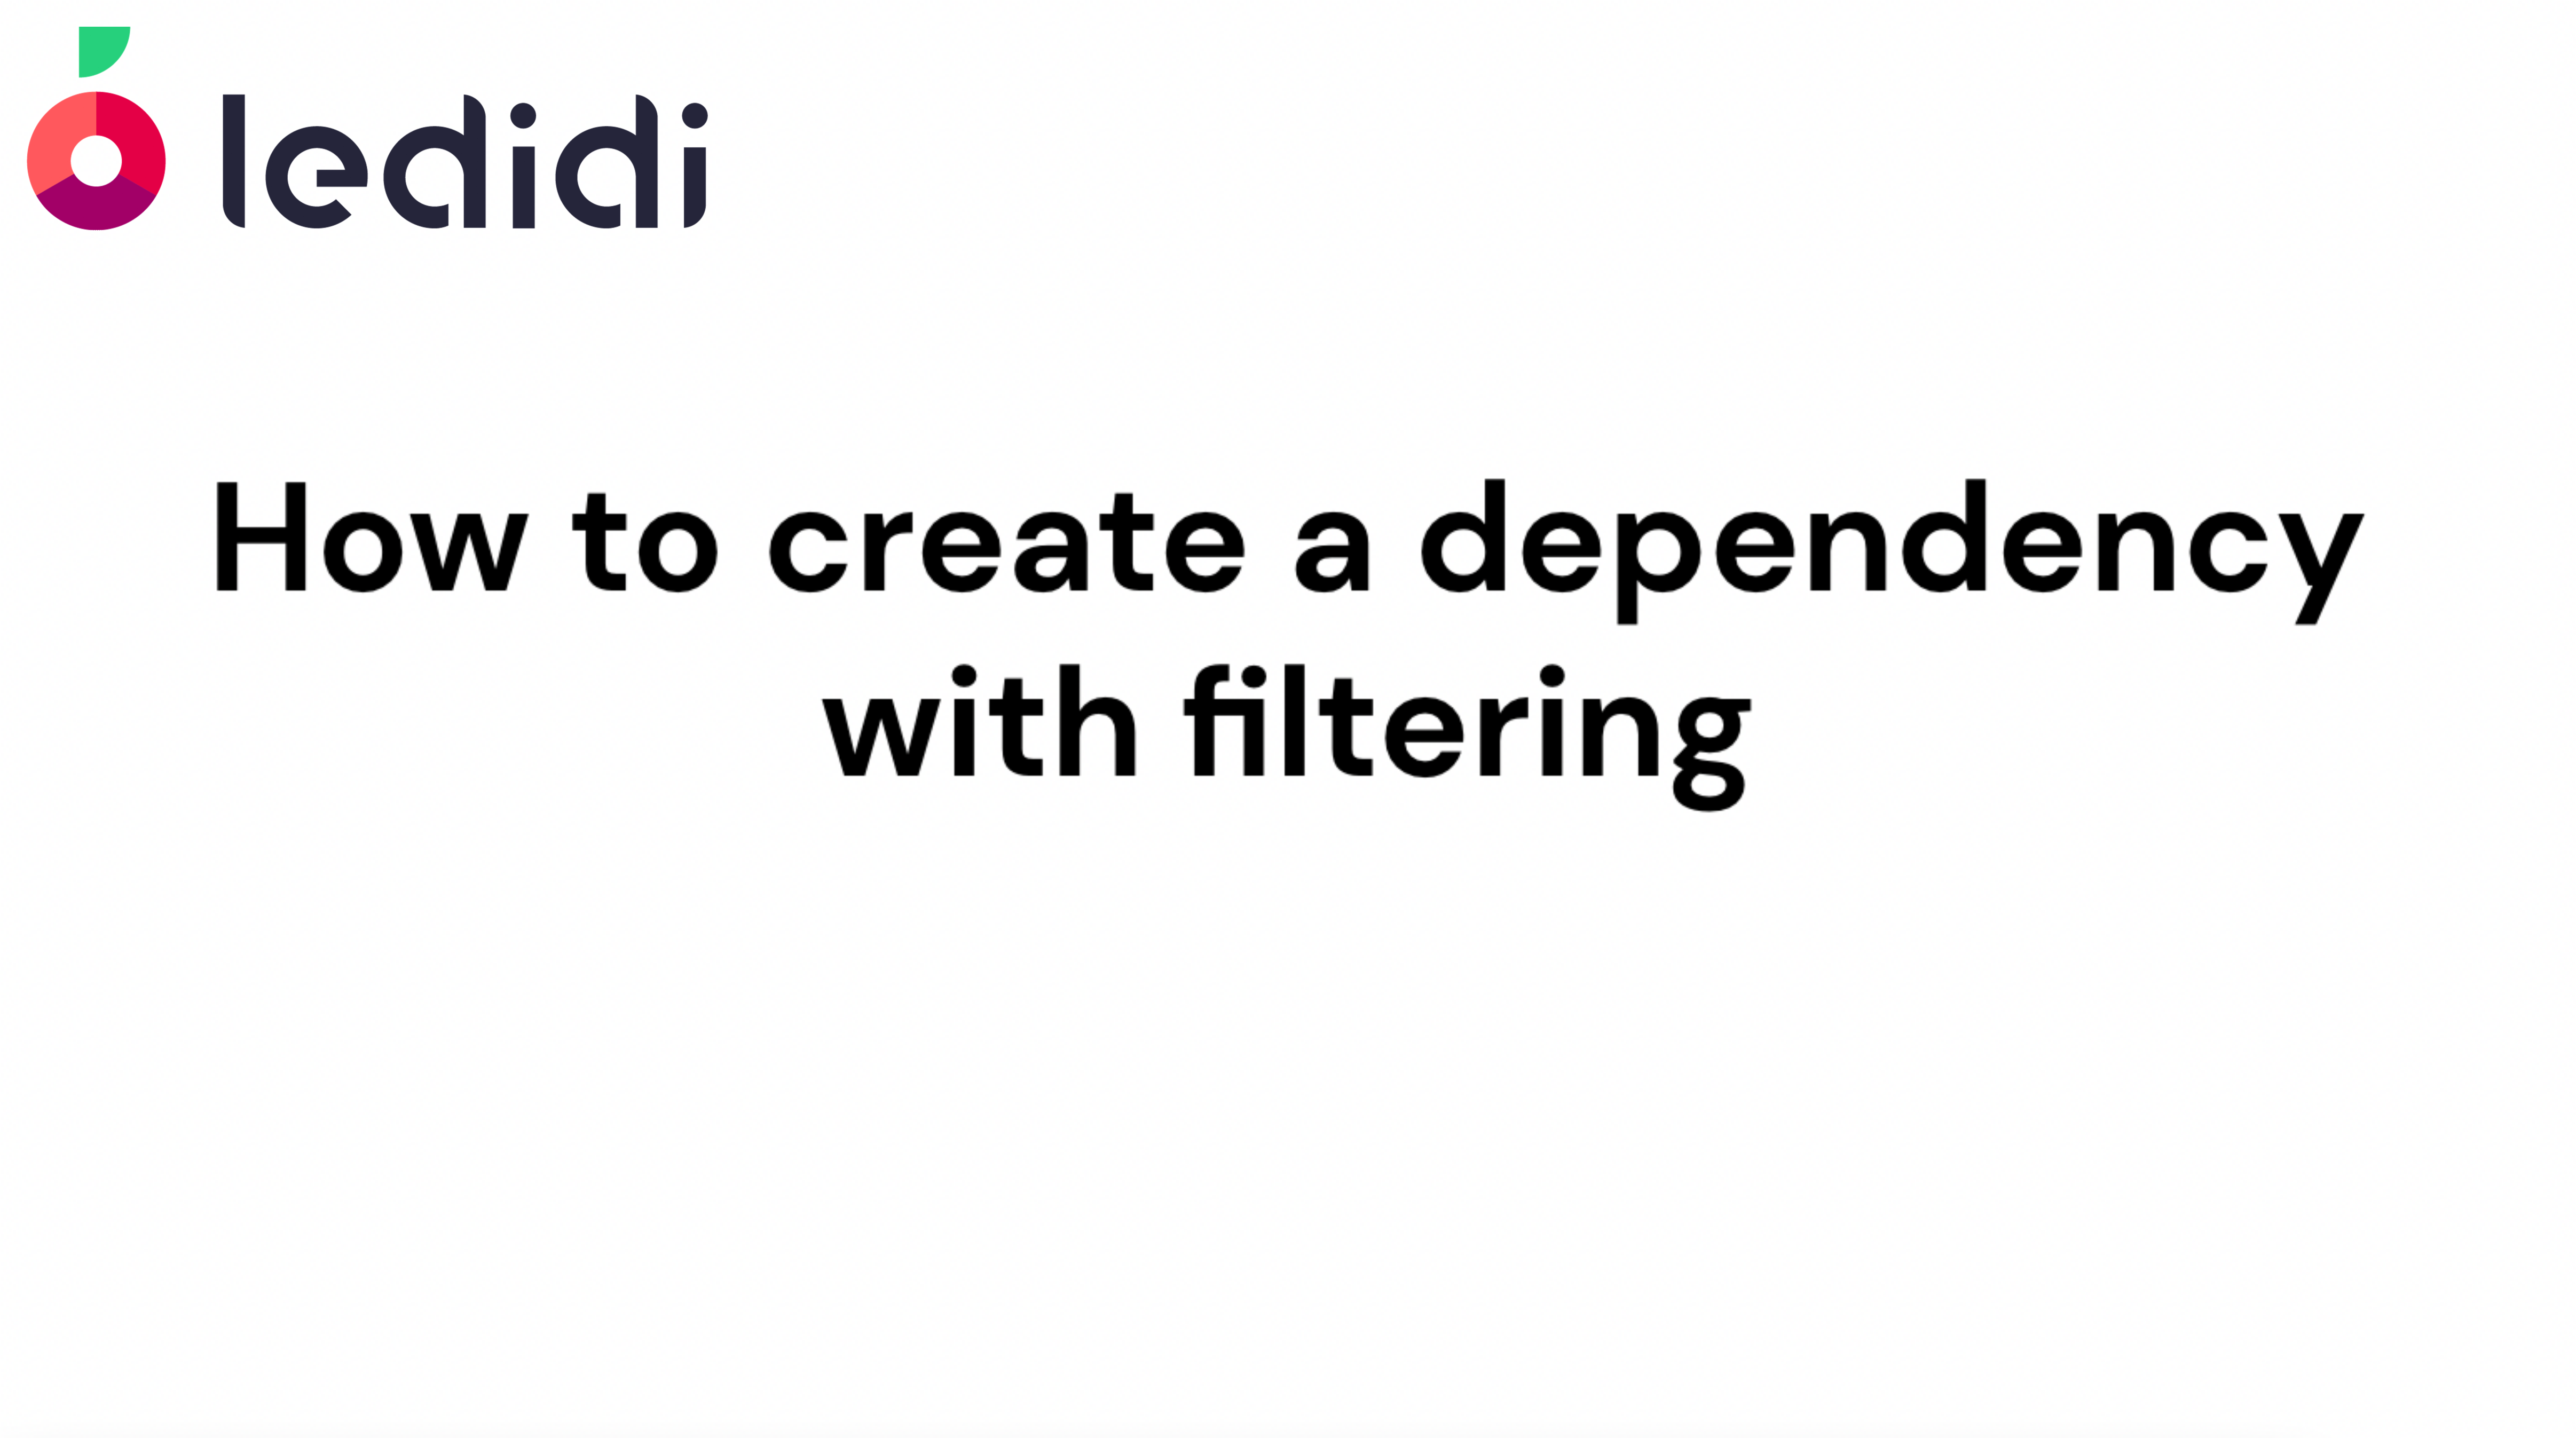 How to create a dependency with filtering